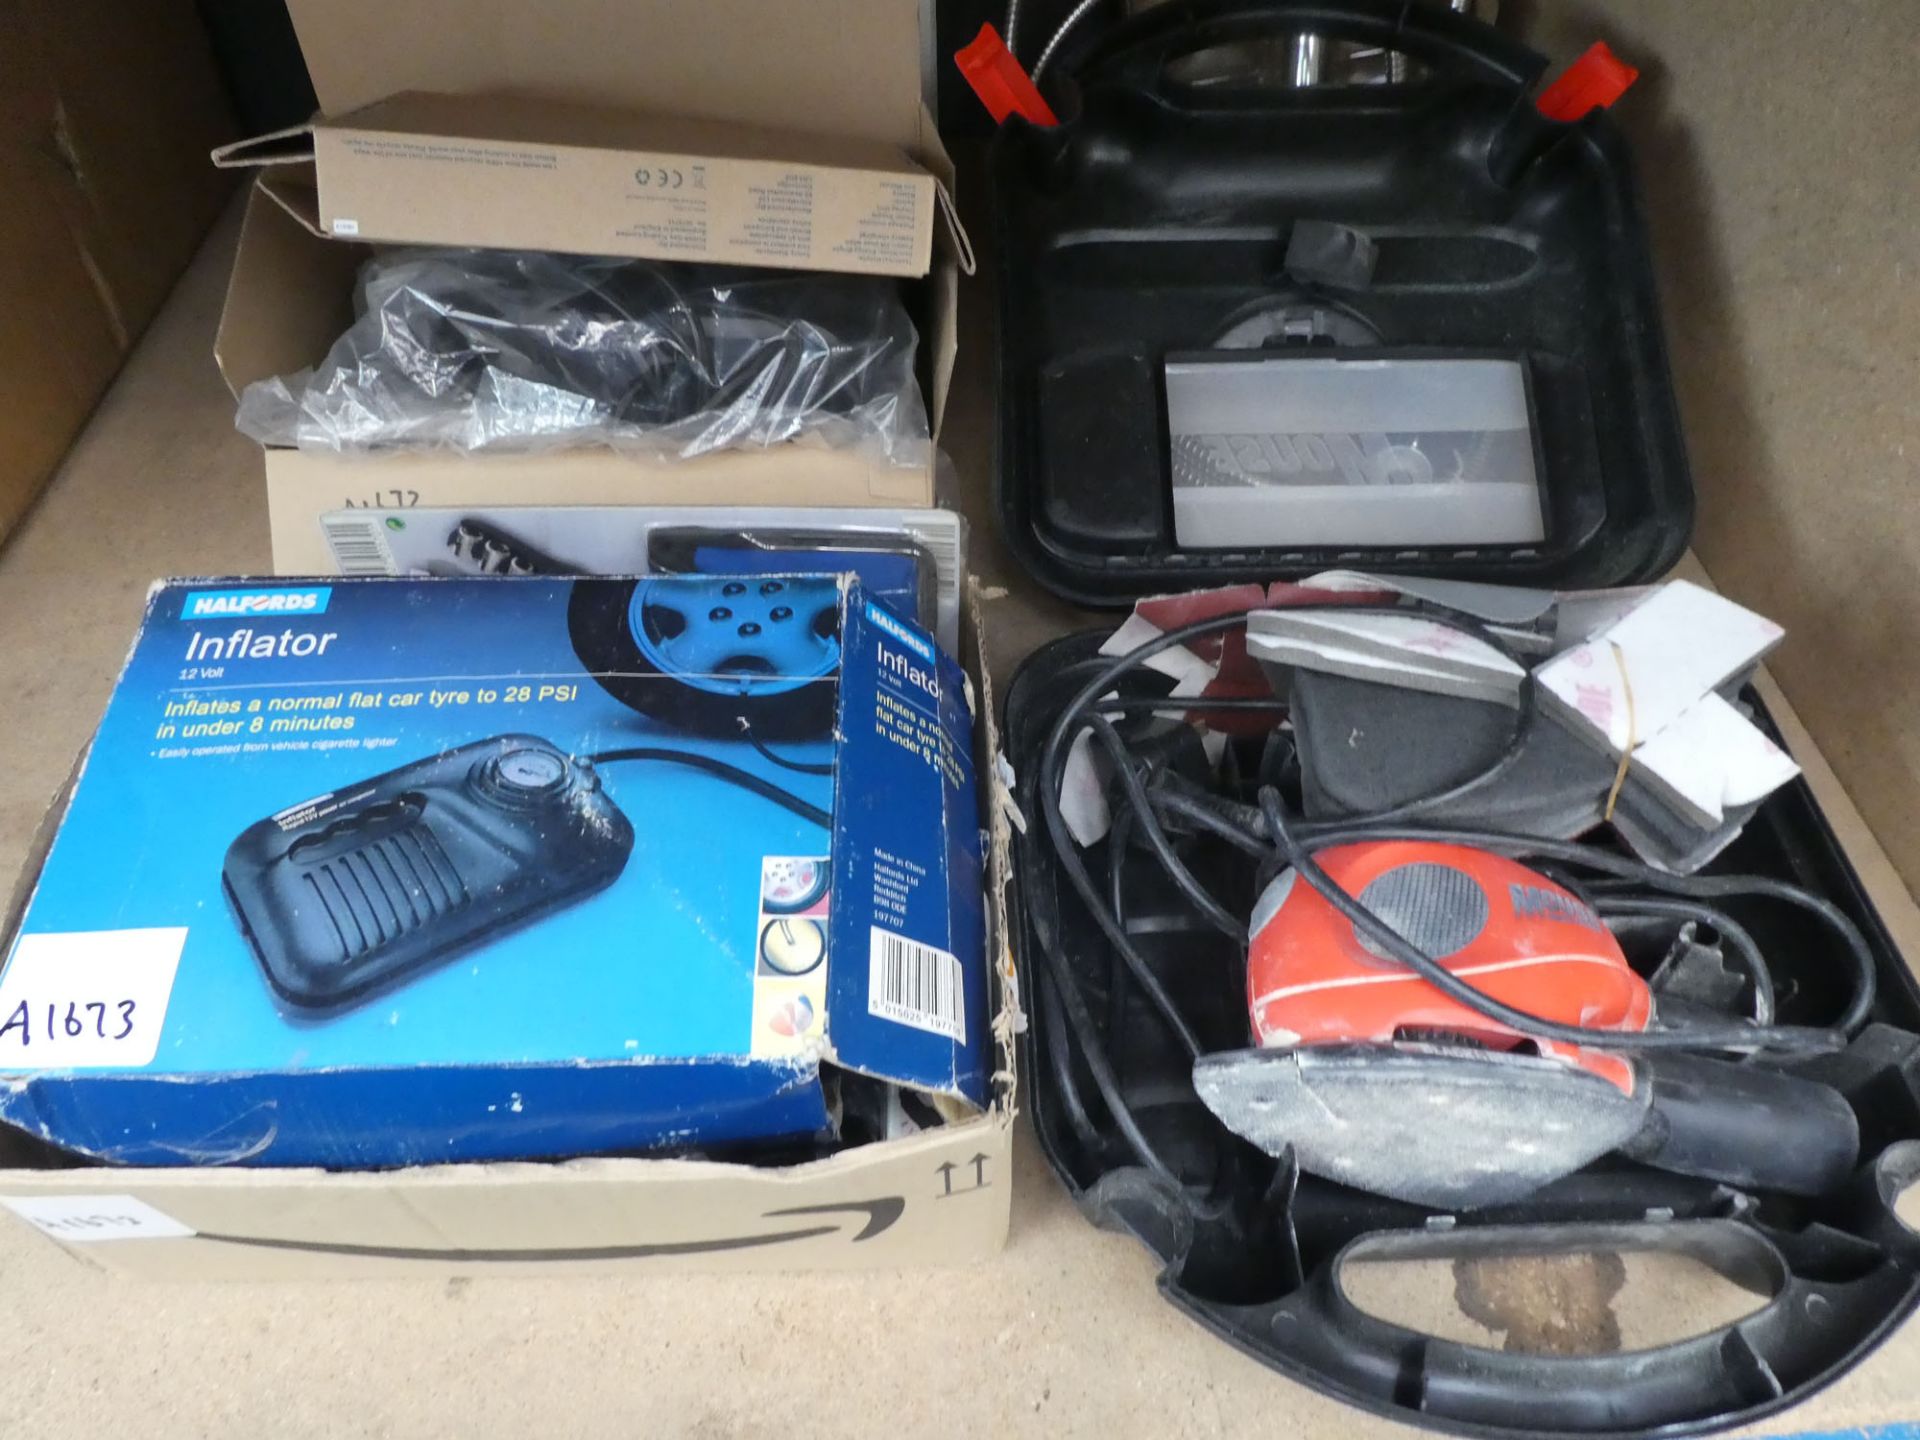 Black and Decker mouse sander, a Halfords tyre inflator, bike parts, telephones, cabling and gas